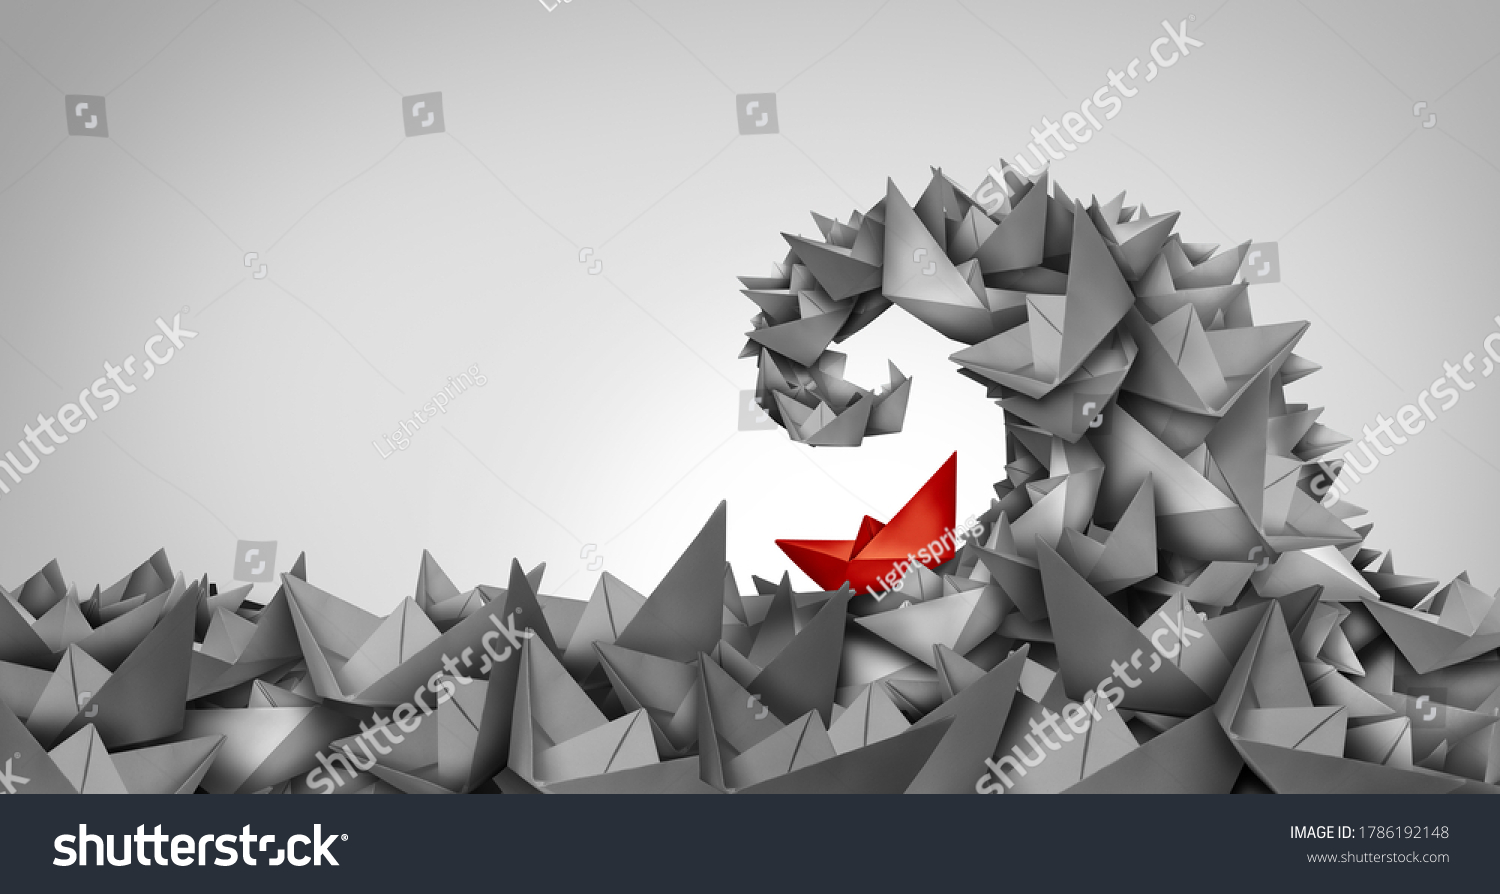 Trouble concept as a business symbol as a paper boat climbing uphill as a metaphor for struggle and overcoming obstacles and competition strategy. #1786192148